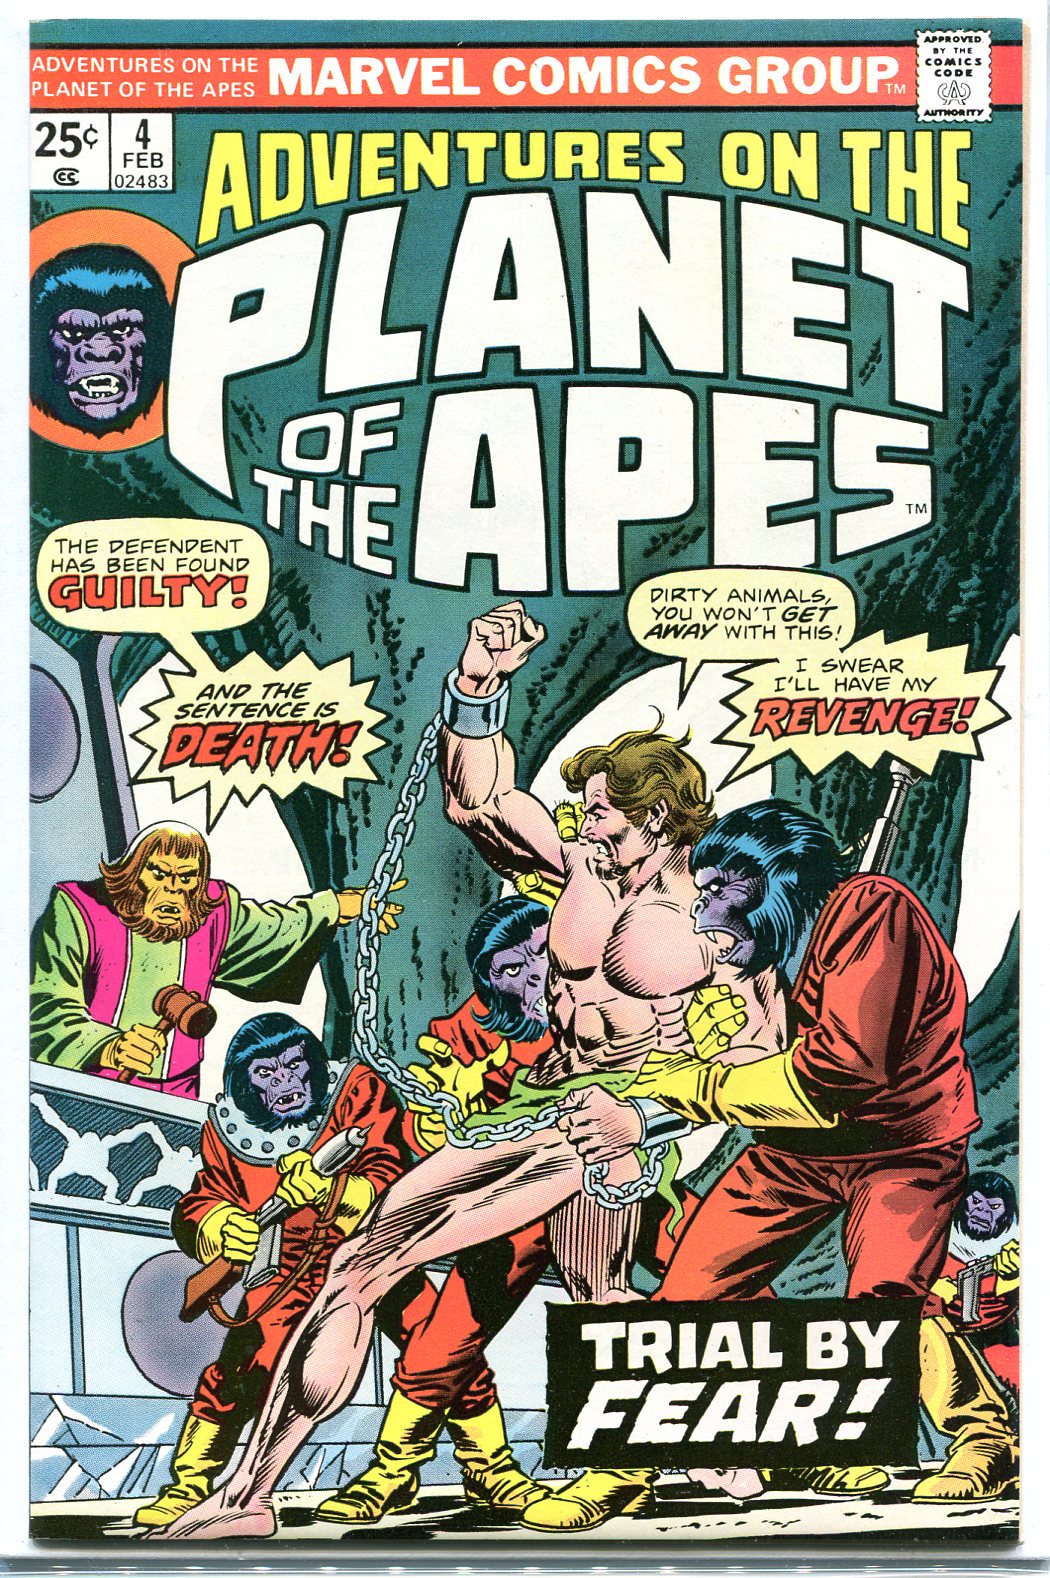 ADVENTURES ON THE PLANET OF THE APES